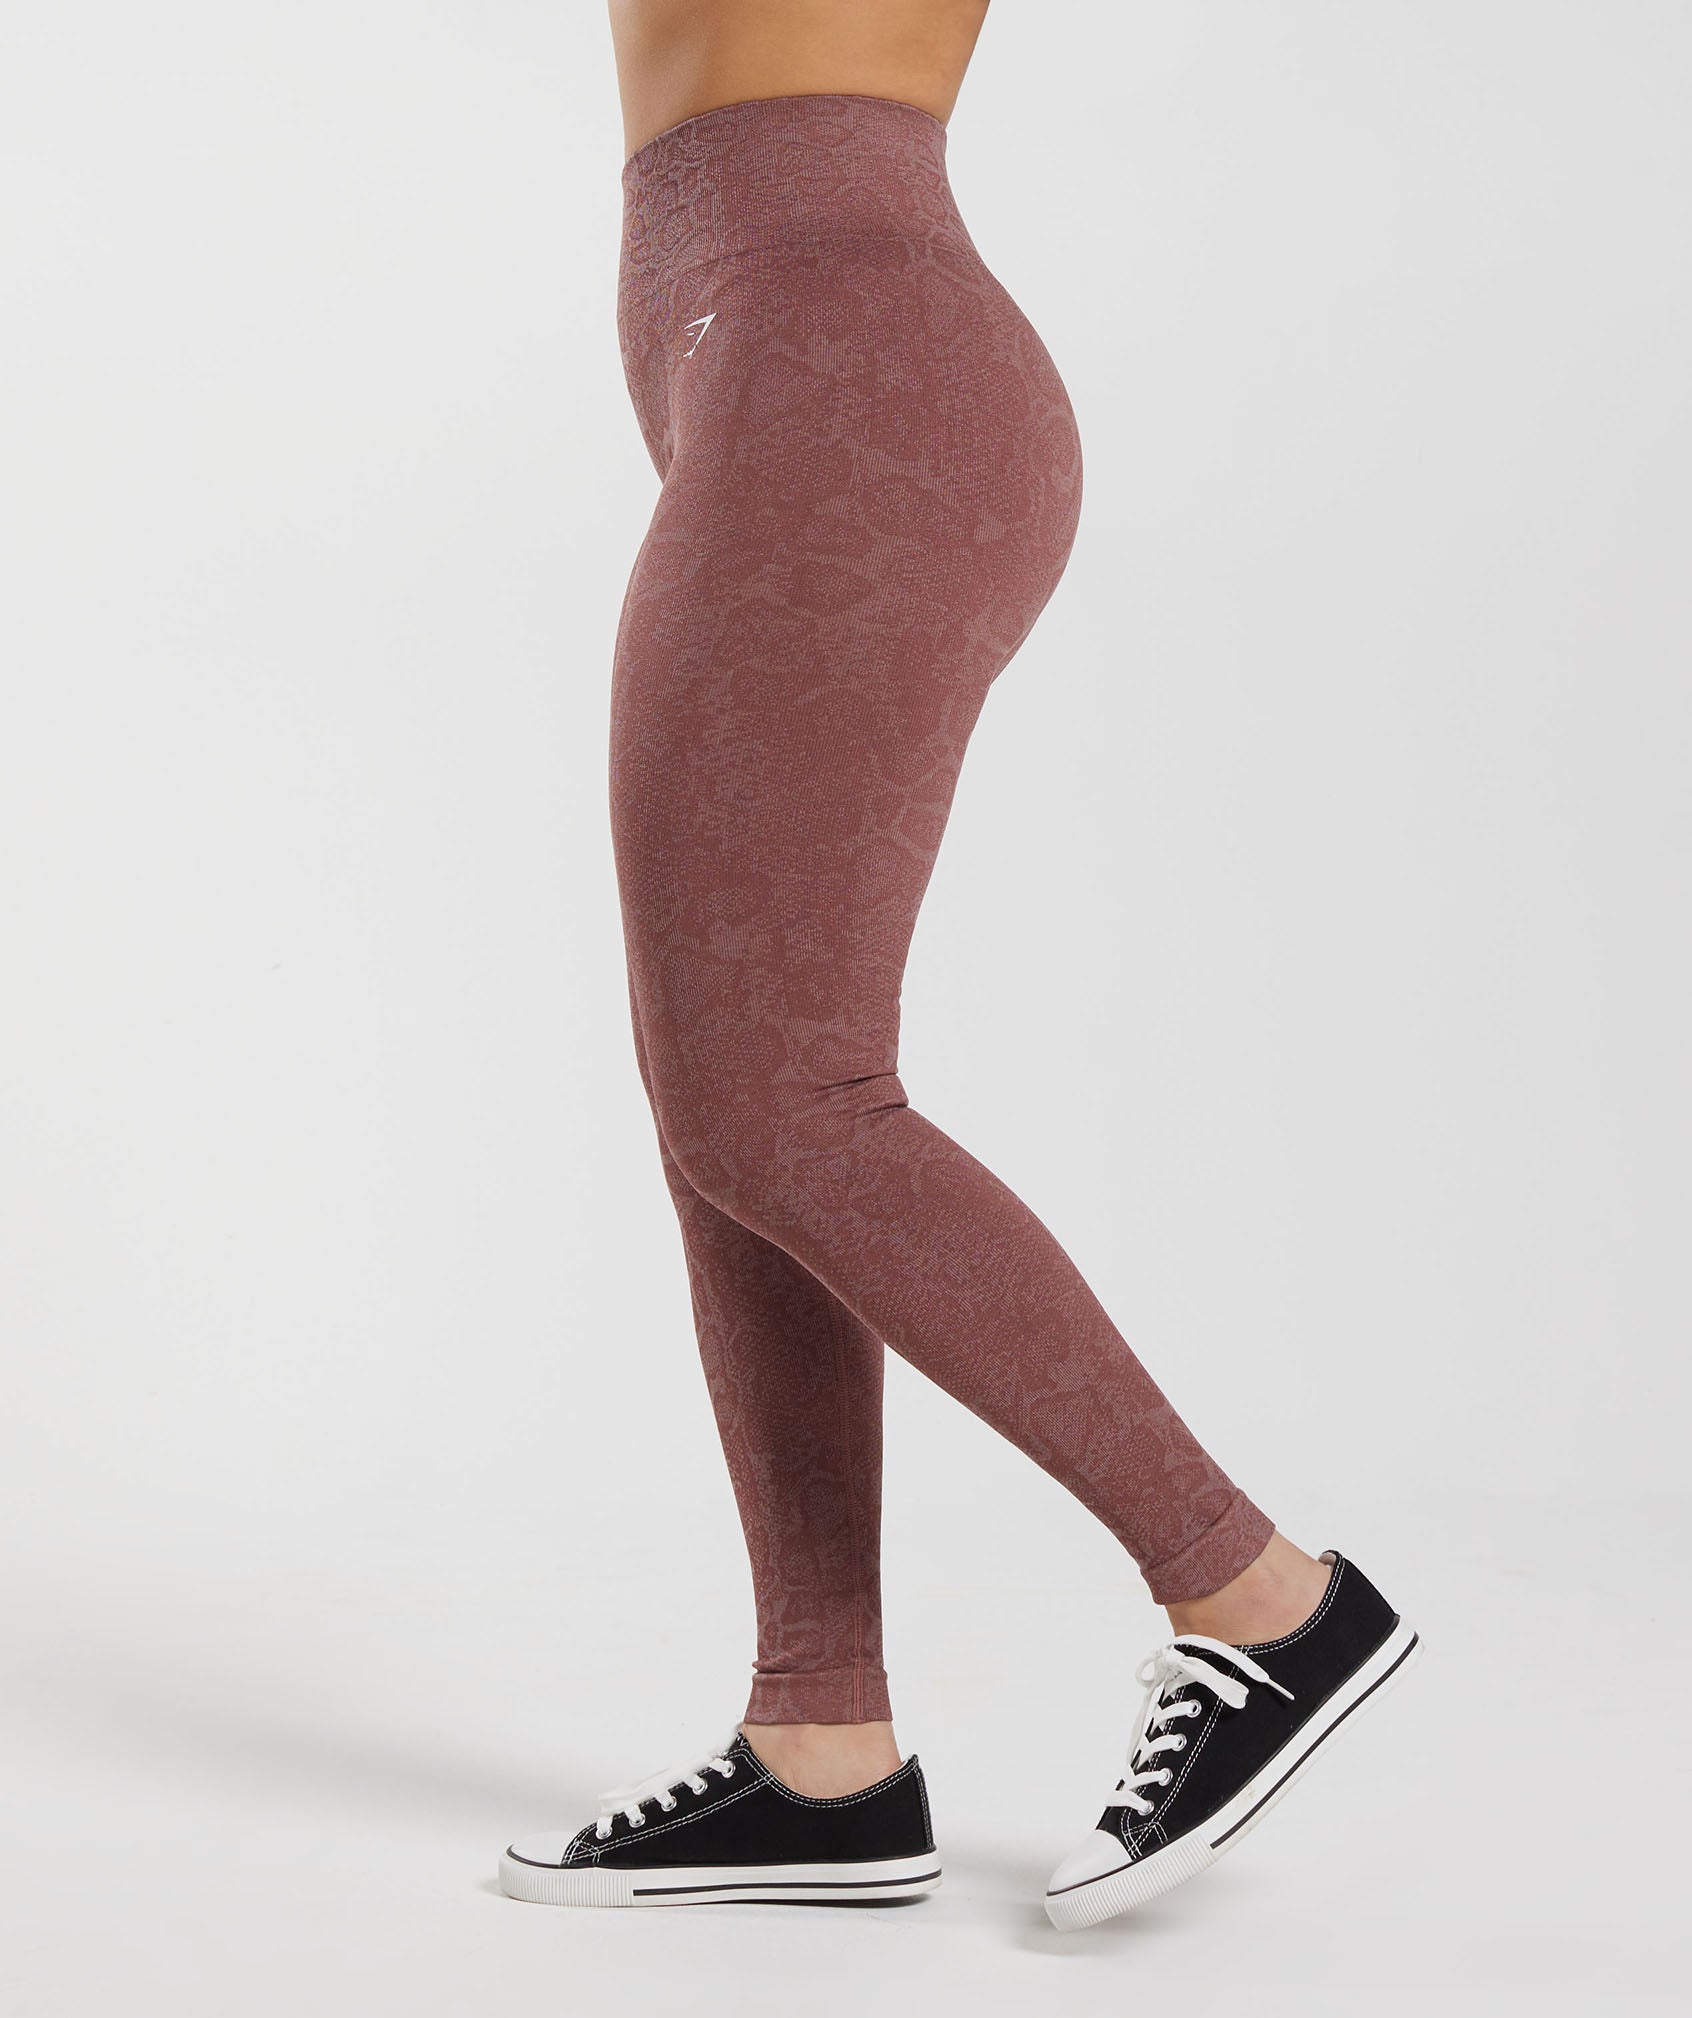 Dark pink or boysberry sports leggings made in Quebec – APRT Créations